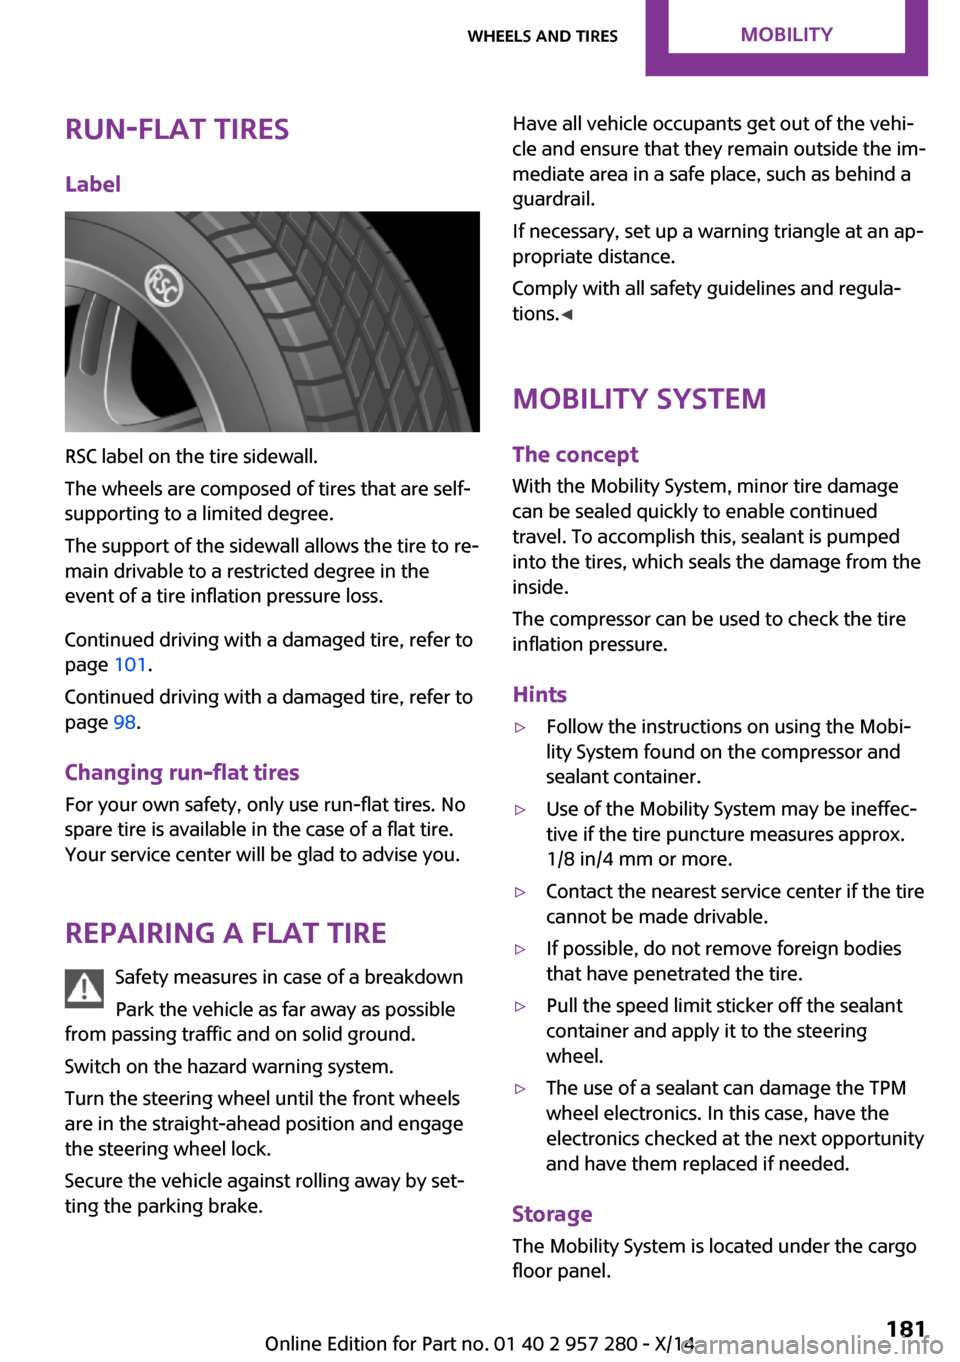 MINI 3 door 2014  Owners Manual Run-flat tiresLabel
RSC label on the tire sidewall.
The wheels are composed of tires that are self-
supporting to a limited degree.
The support of the sidewall allows the tire to re‐
main drivable t